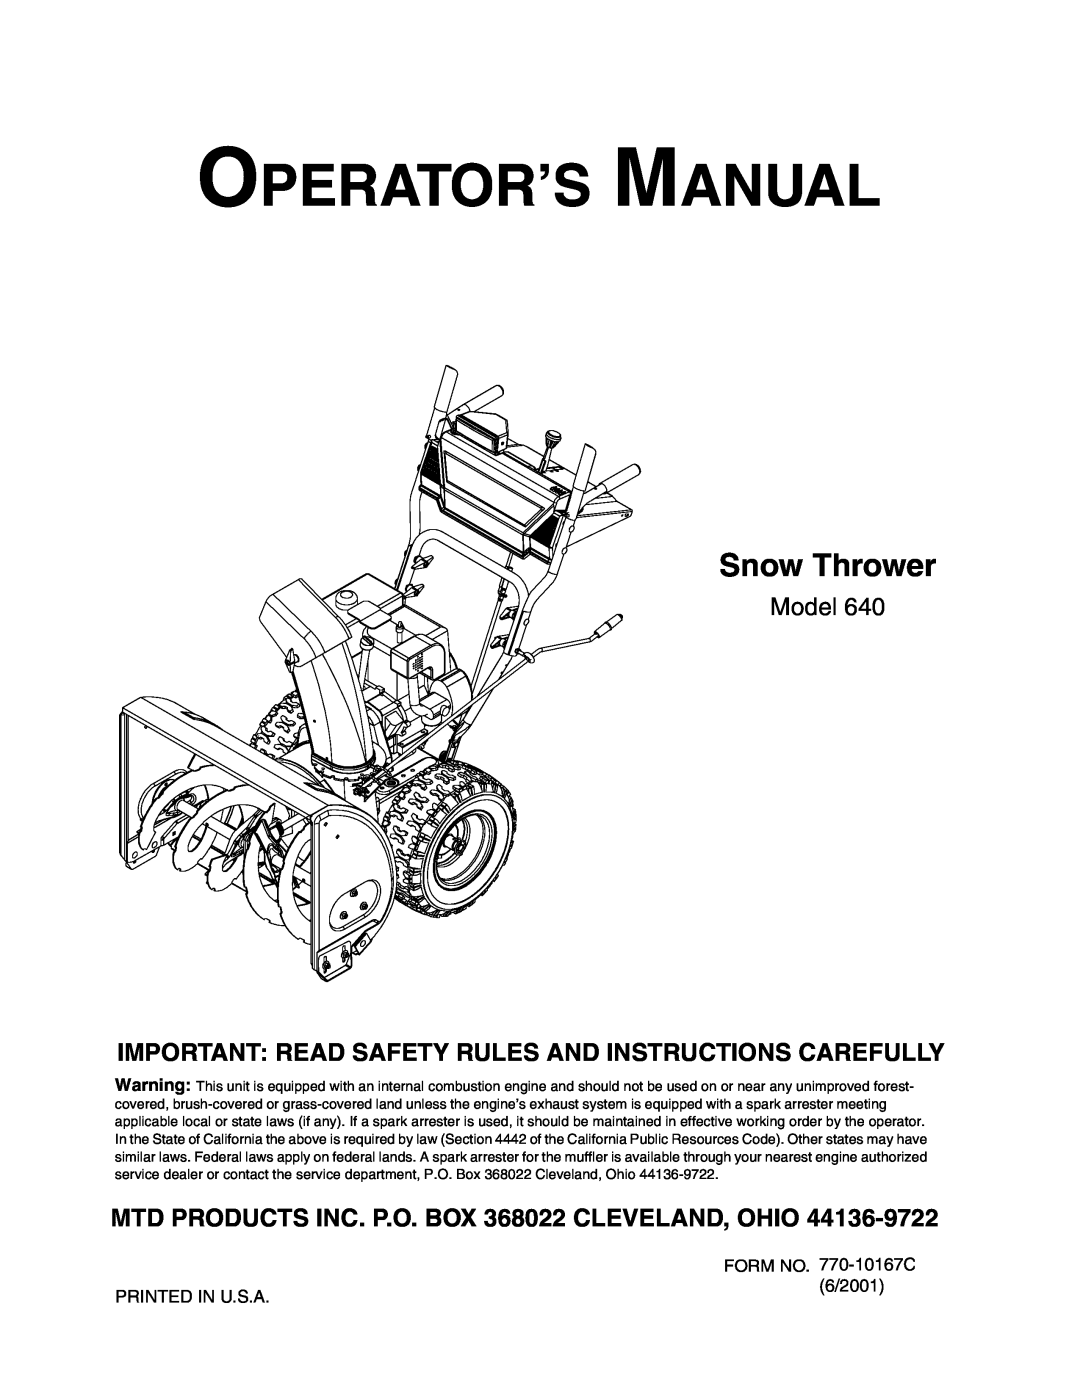 MTD 640 manual Operator’S Manual, Snow Thrower, Model, Important Read Safety Rules And Instructions Carefully 